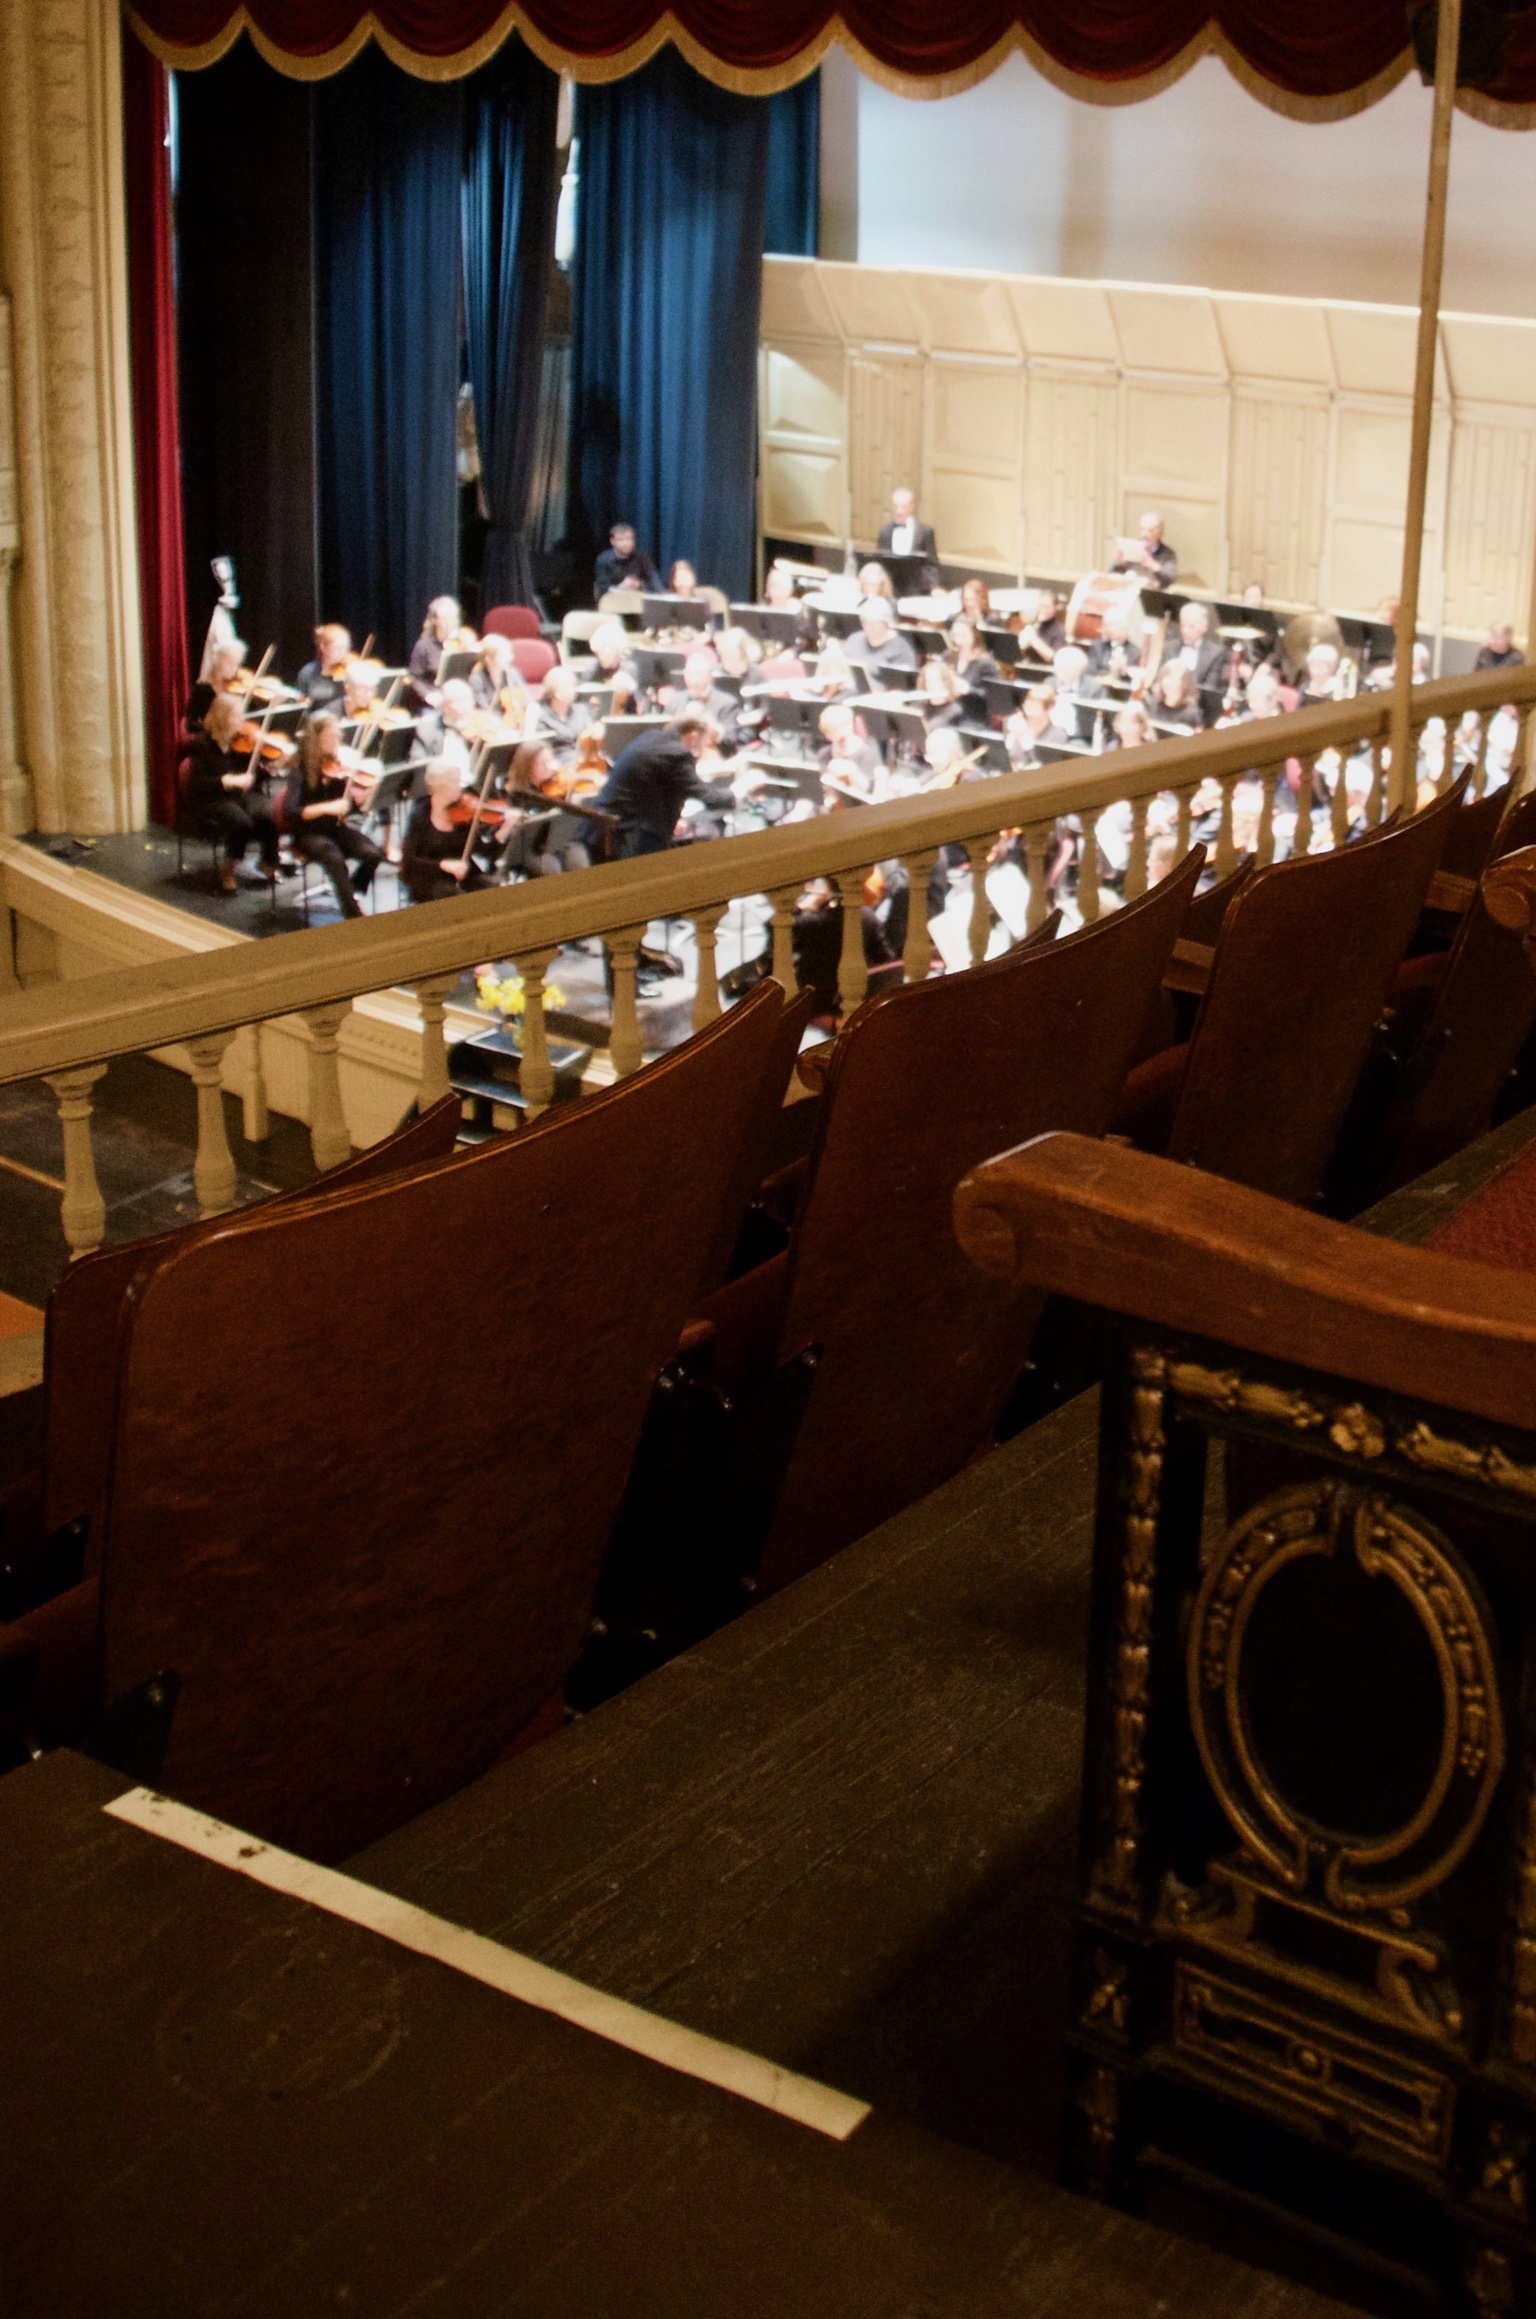 View from the balcony of Vermont Philharmonic performing at the Barre Opera House.